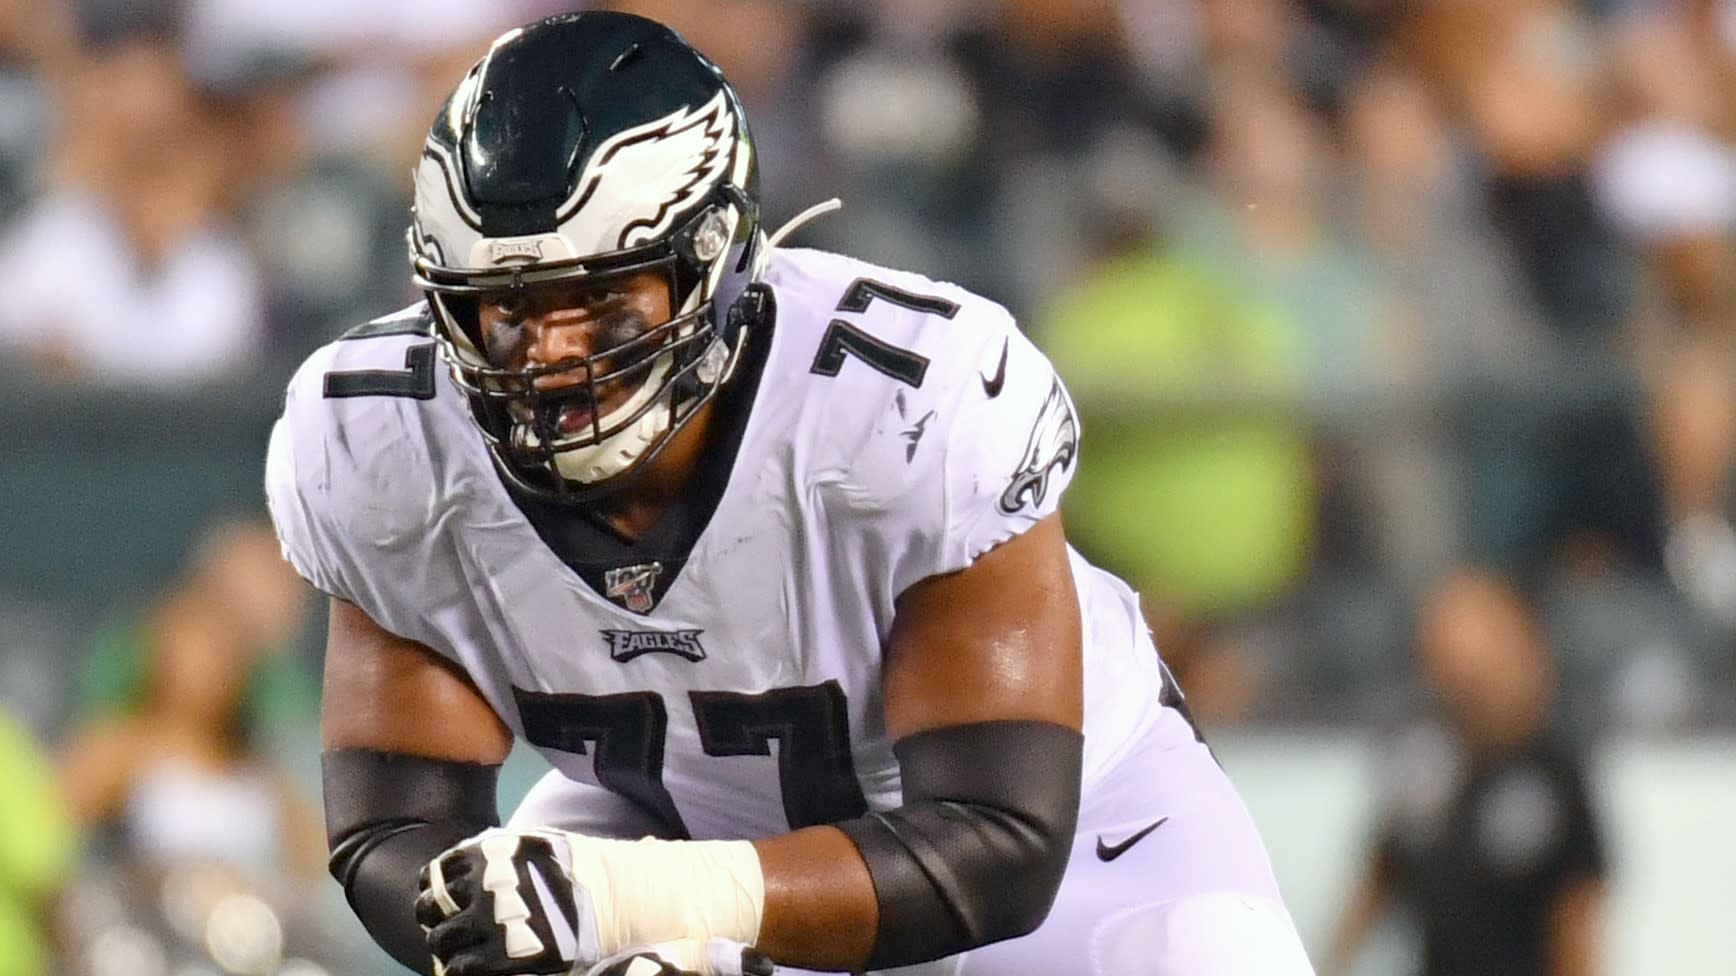 NFL trade rumors: Chiefs' surprising OL moves should lead to an obvious Eagles trade